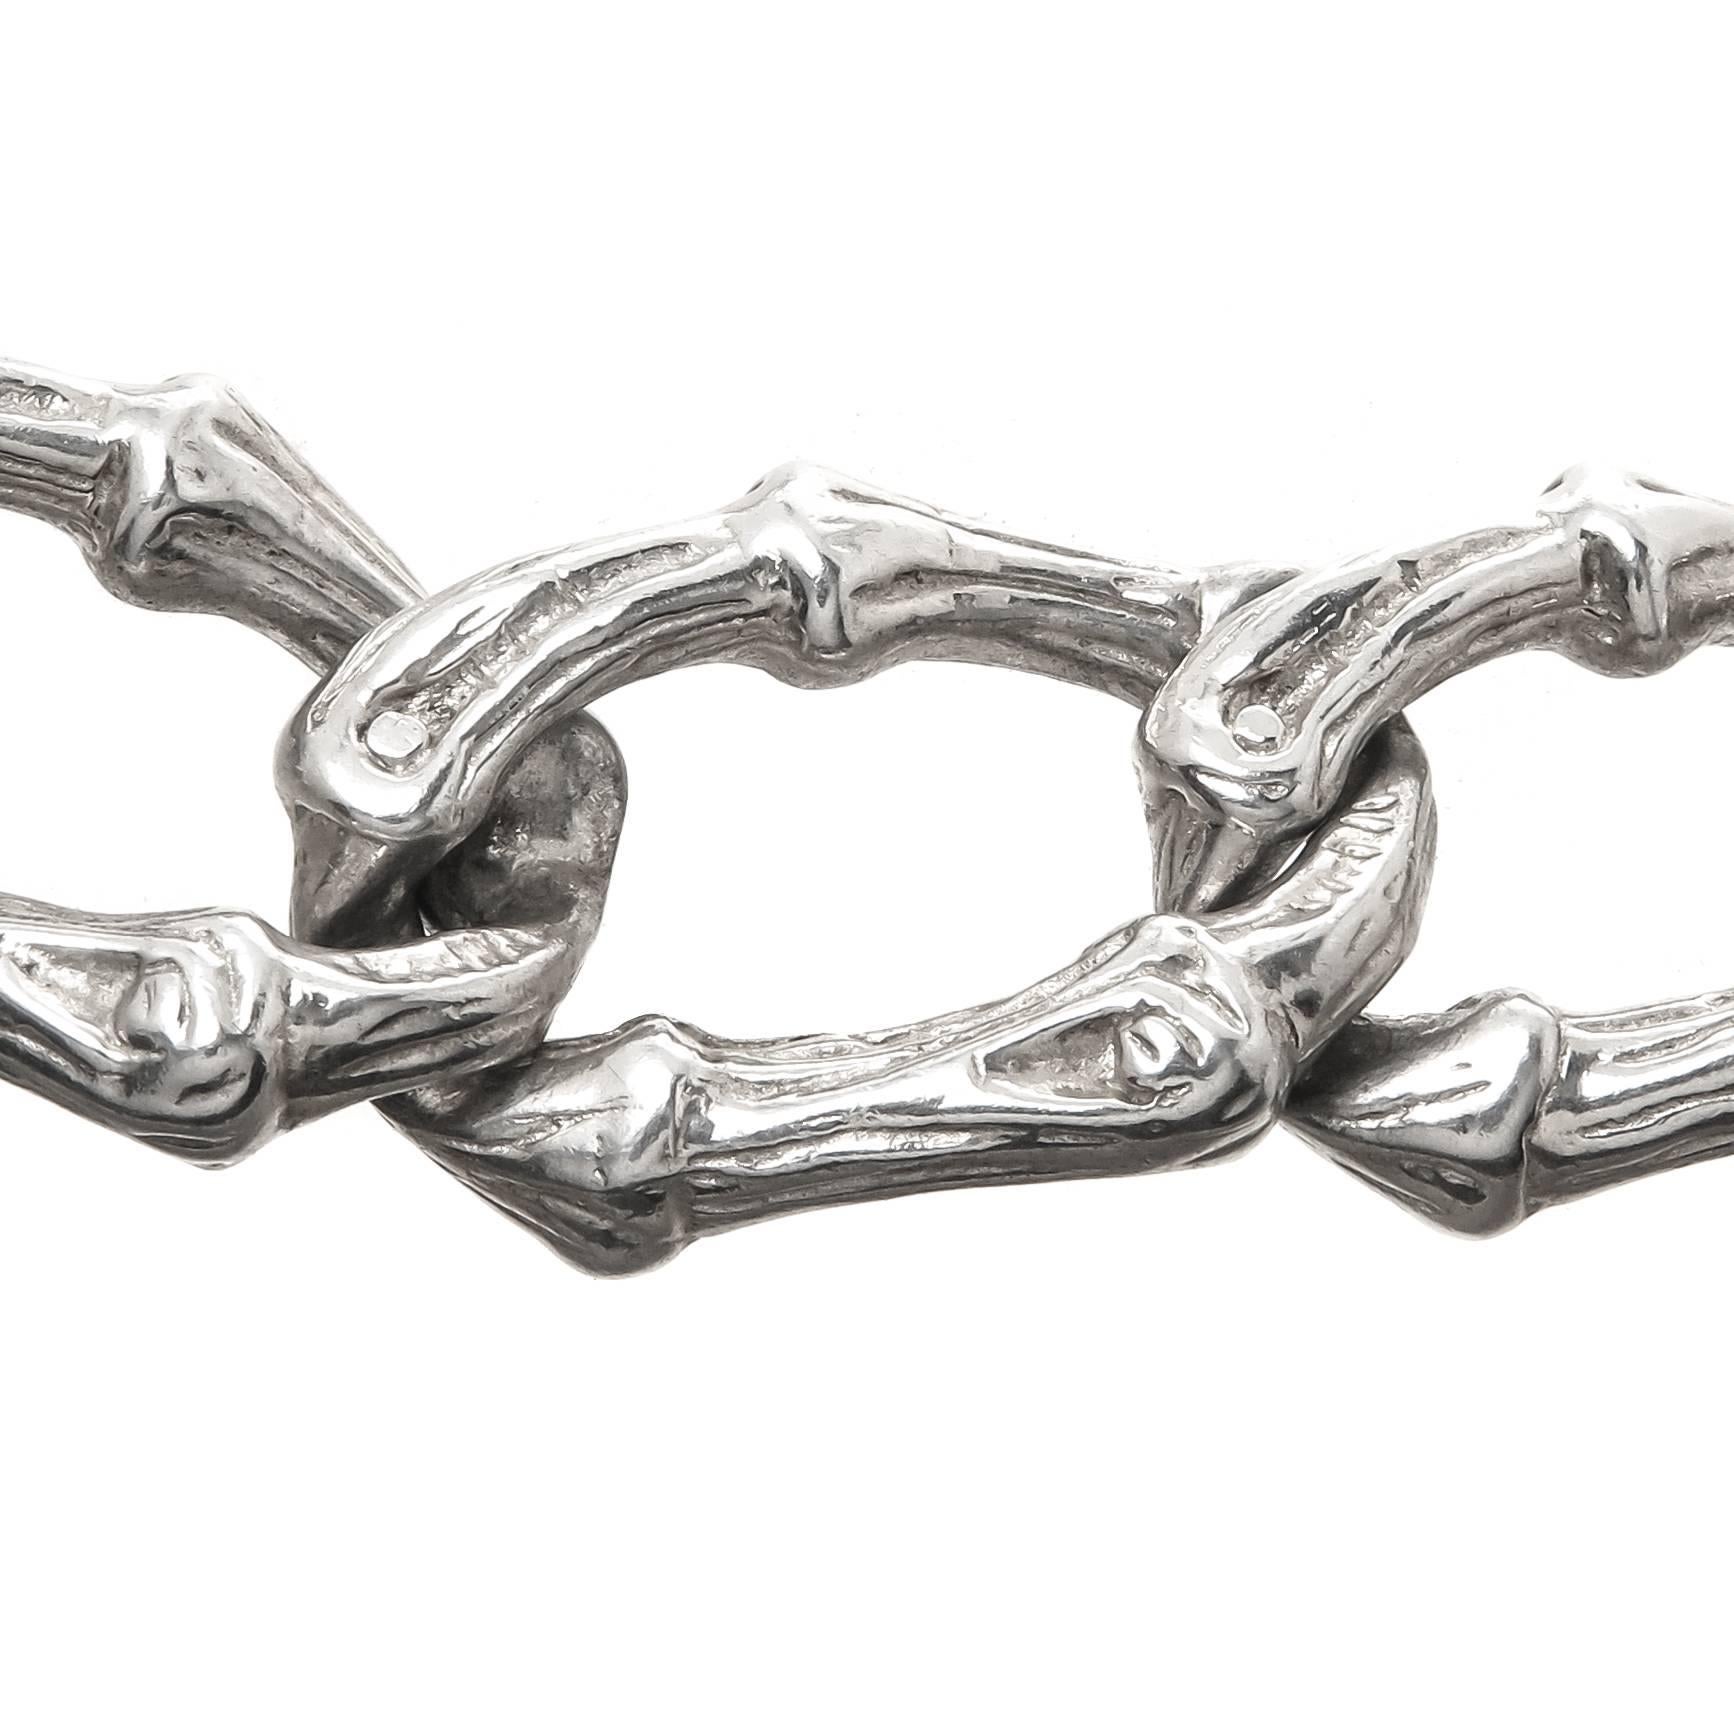 Circa 1990s Tiffany & Company Sterling Silver Bamboo Link Bracelet, having Solid links and measuring 7 3/4 inch in length and 5/8 inch wide, having a Toggle clasp.